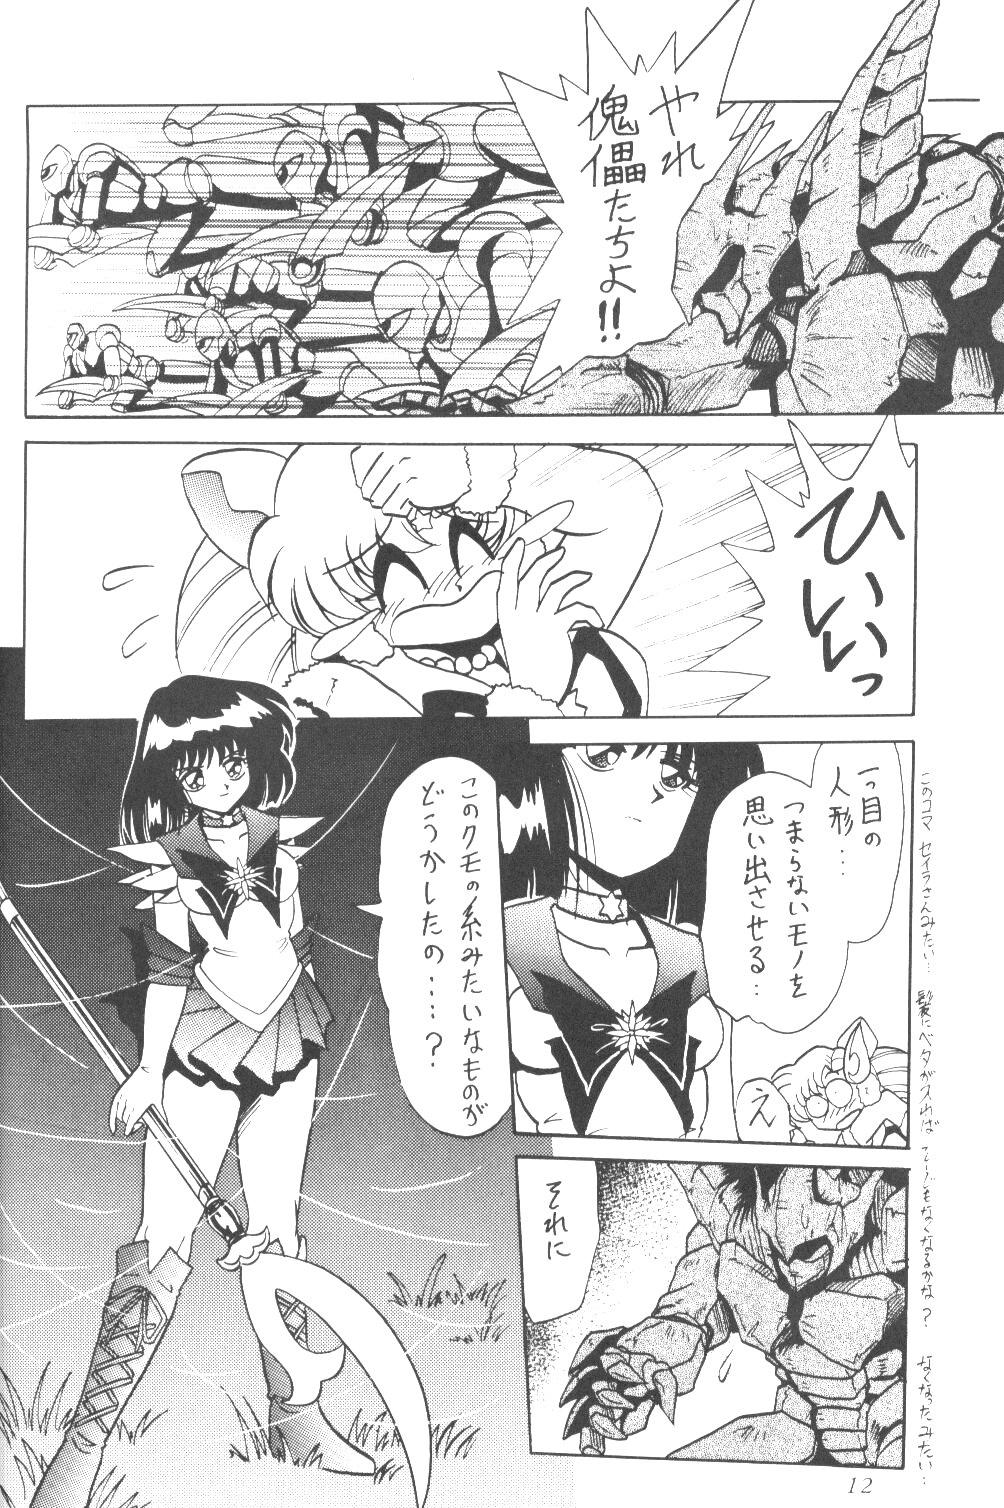 Solo Female Silent Saturn SS vol. 3 - Sailor moon Gay Porn - Page 11